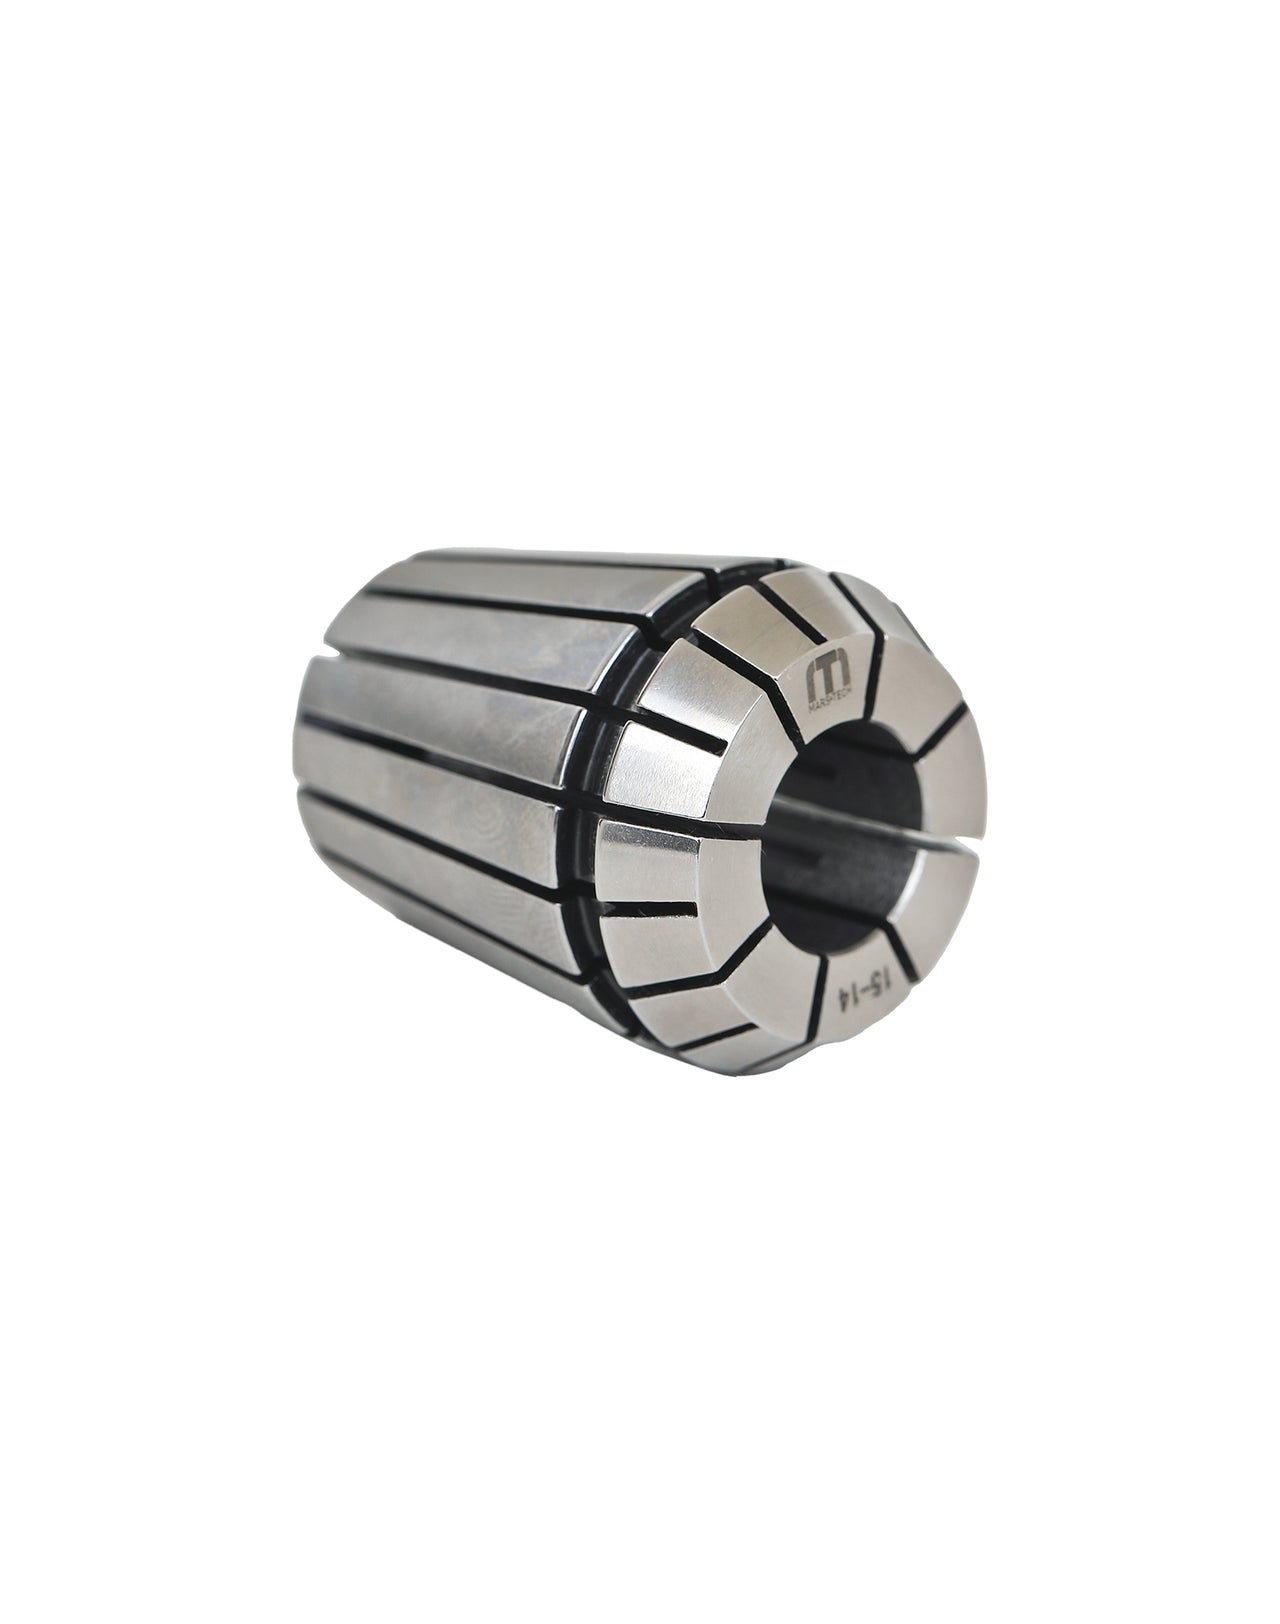 ER25 Collet Ultra high precision 0.005 AAA quality